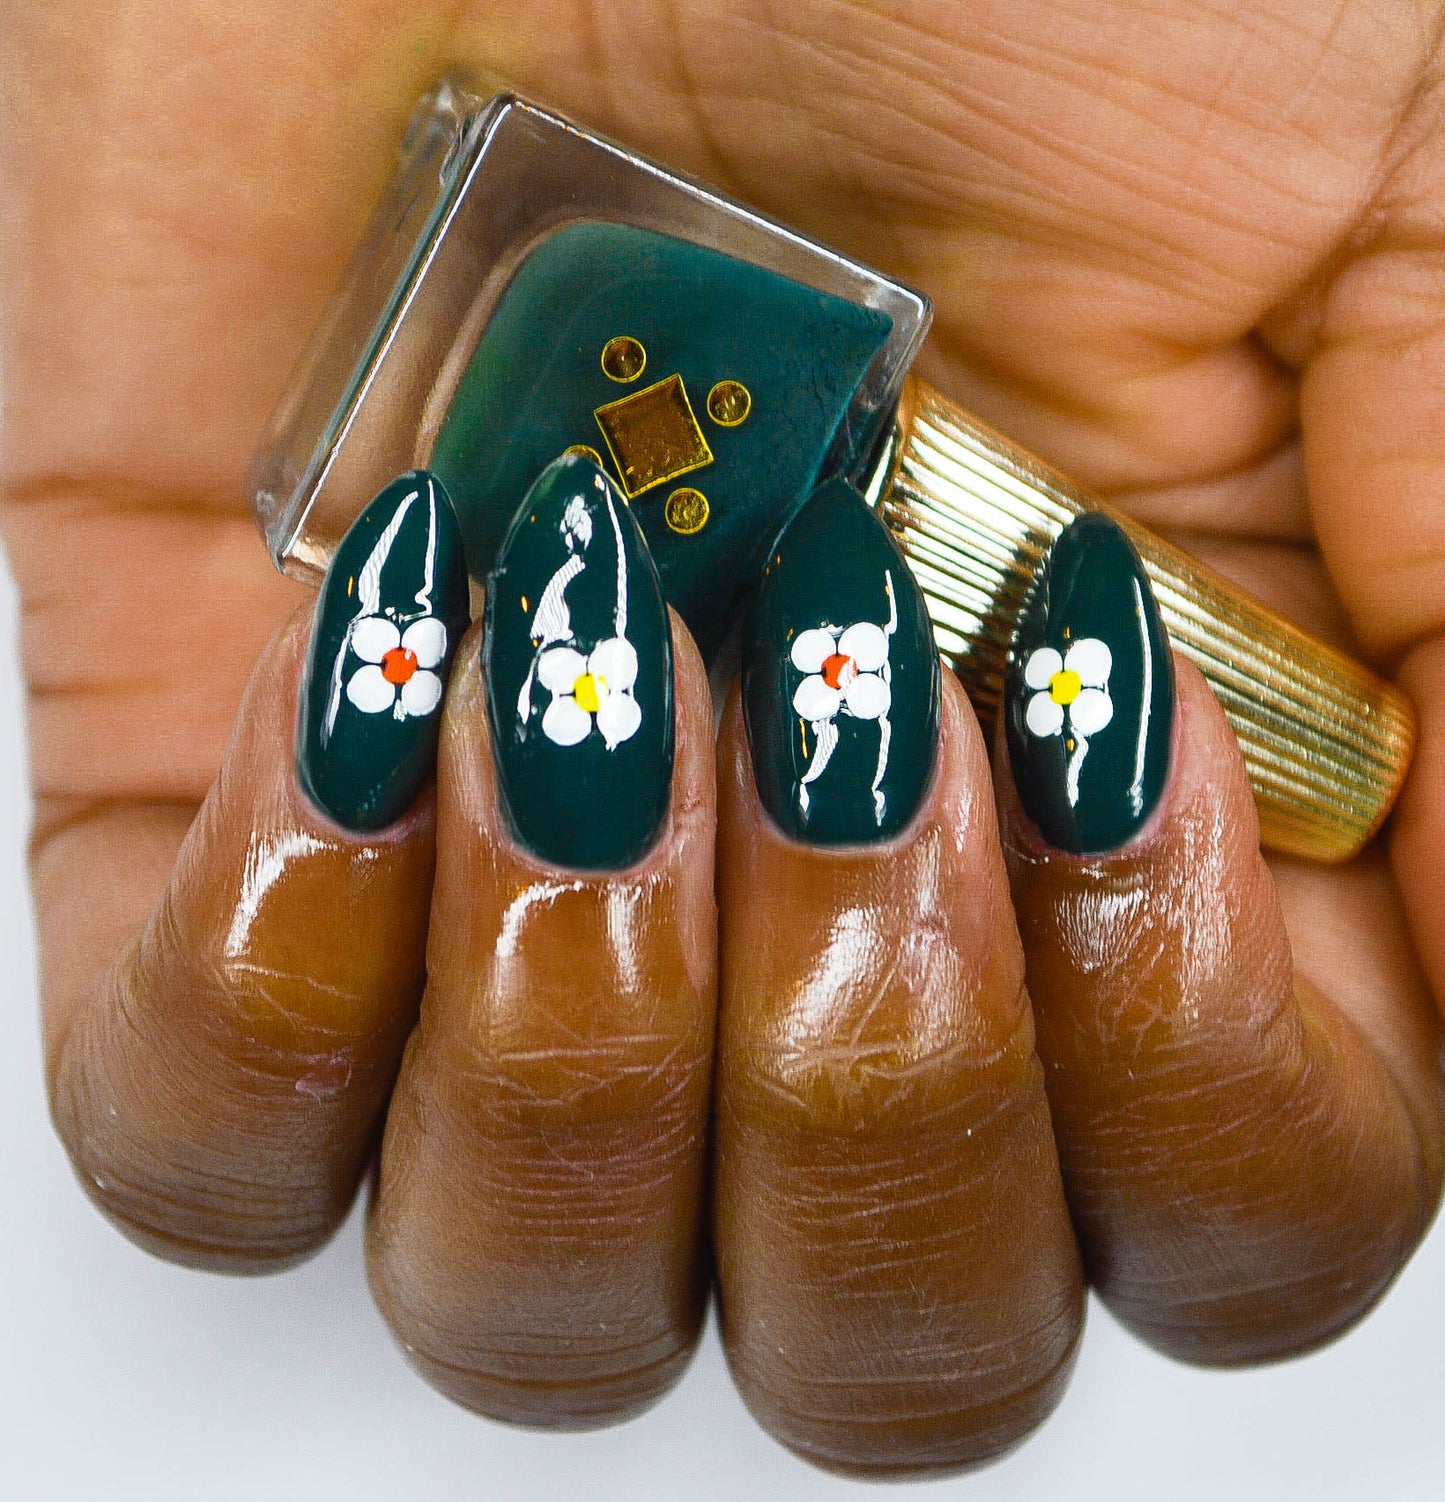 dark green nail polish with white flowers stickers